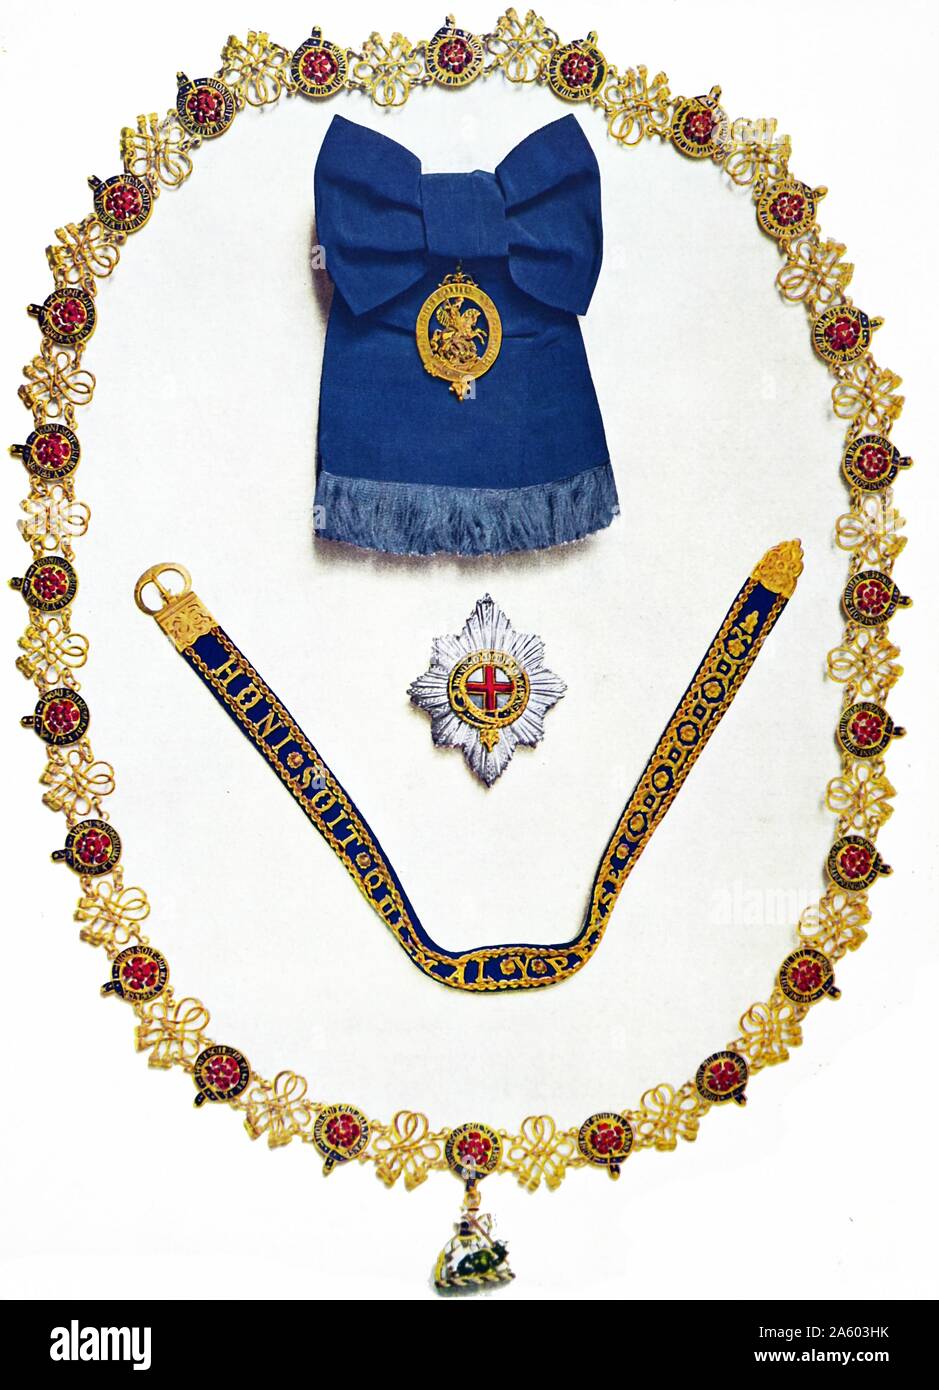 Order of the garter and other coronation ordersand regalia worn by King George VI at his Coronation ans British King in 1937 Stock Photo